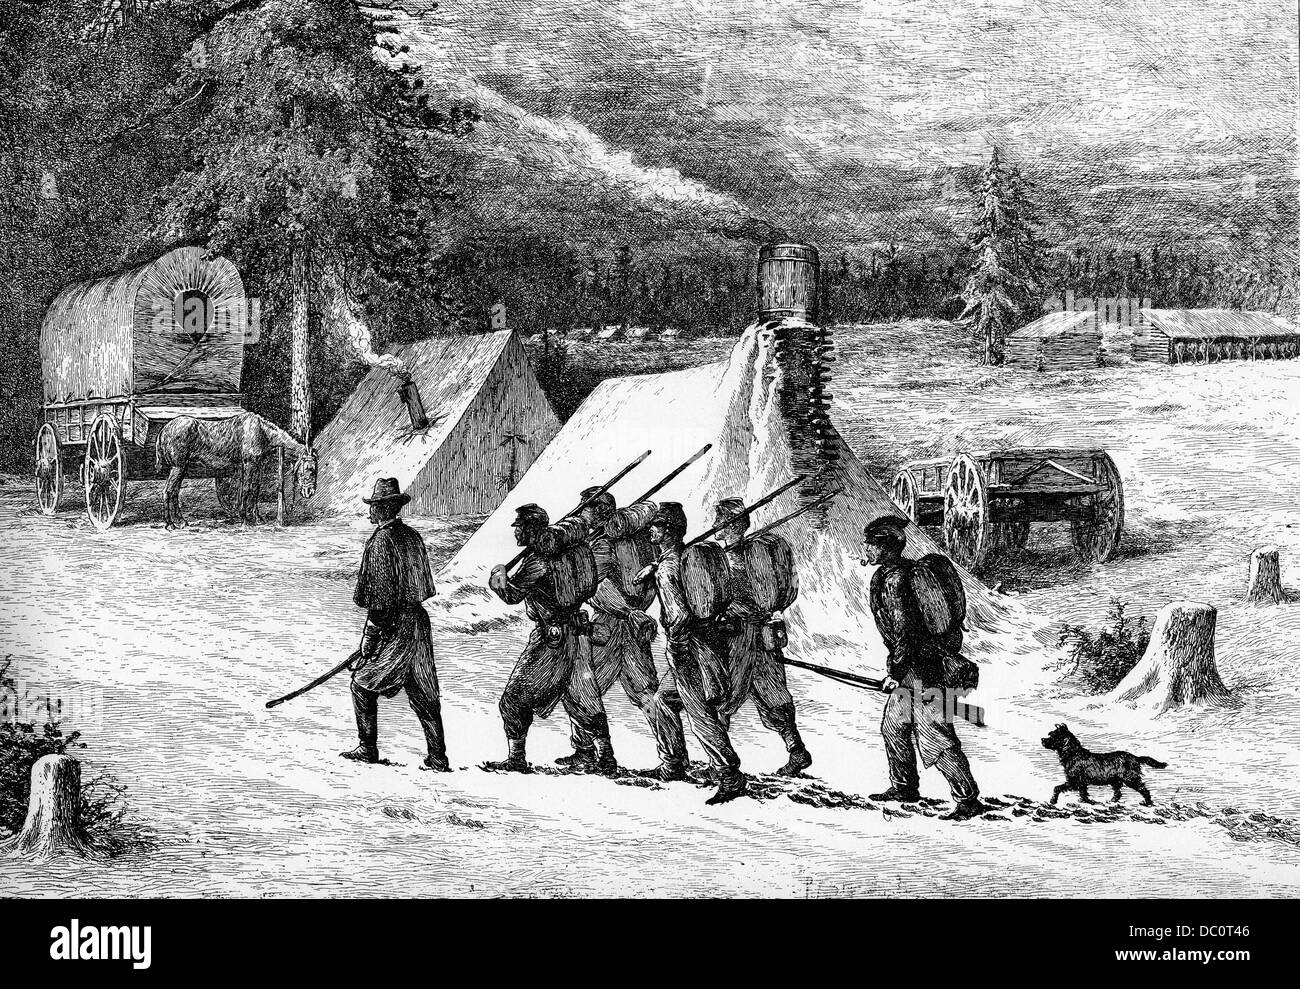 1800s 1860s SOLDIERS ENTERING CAMP DURING WINTER SNOW AMERICAN CIVIL WAR Stock Photo